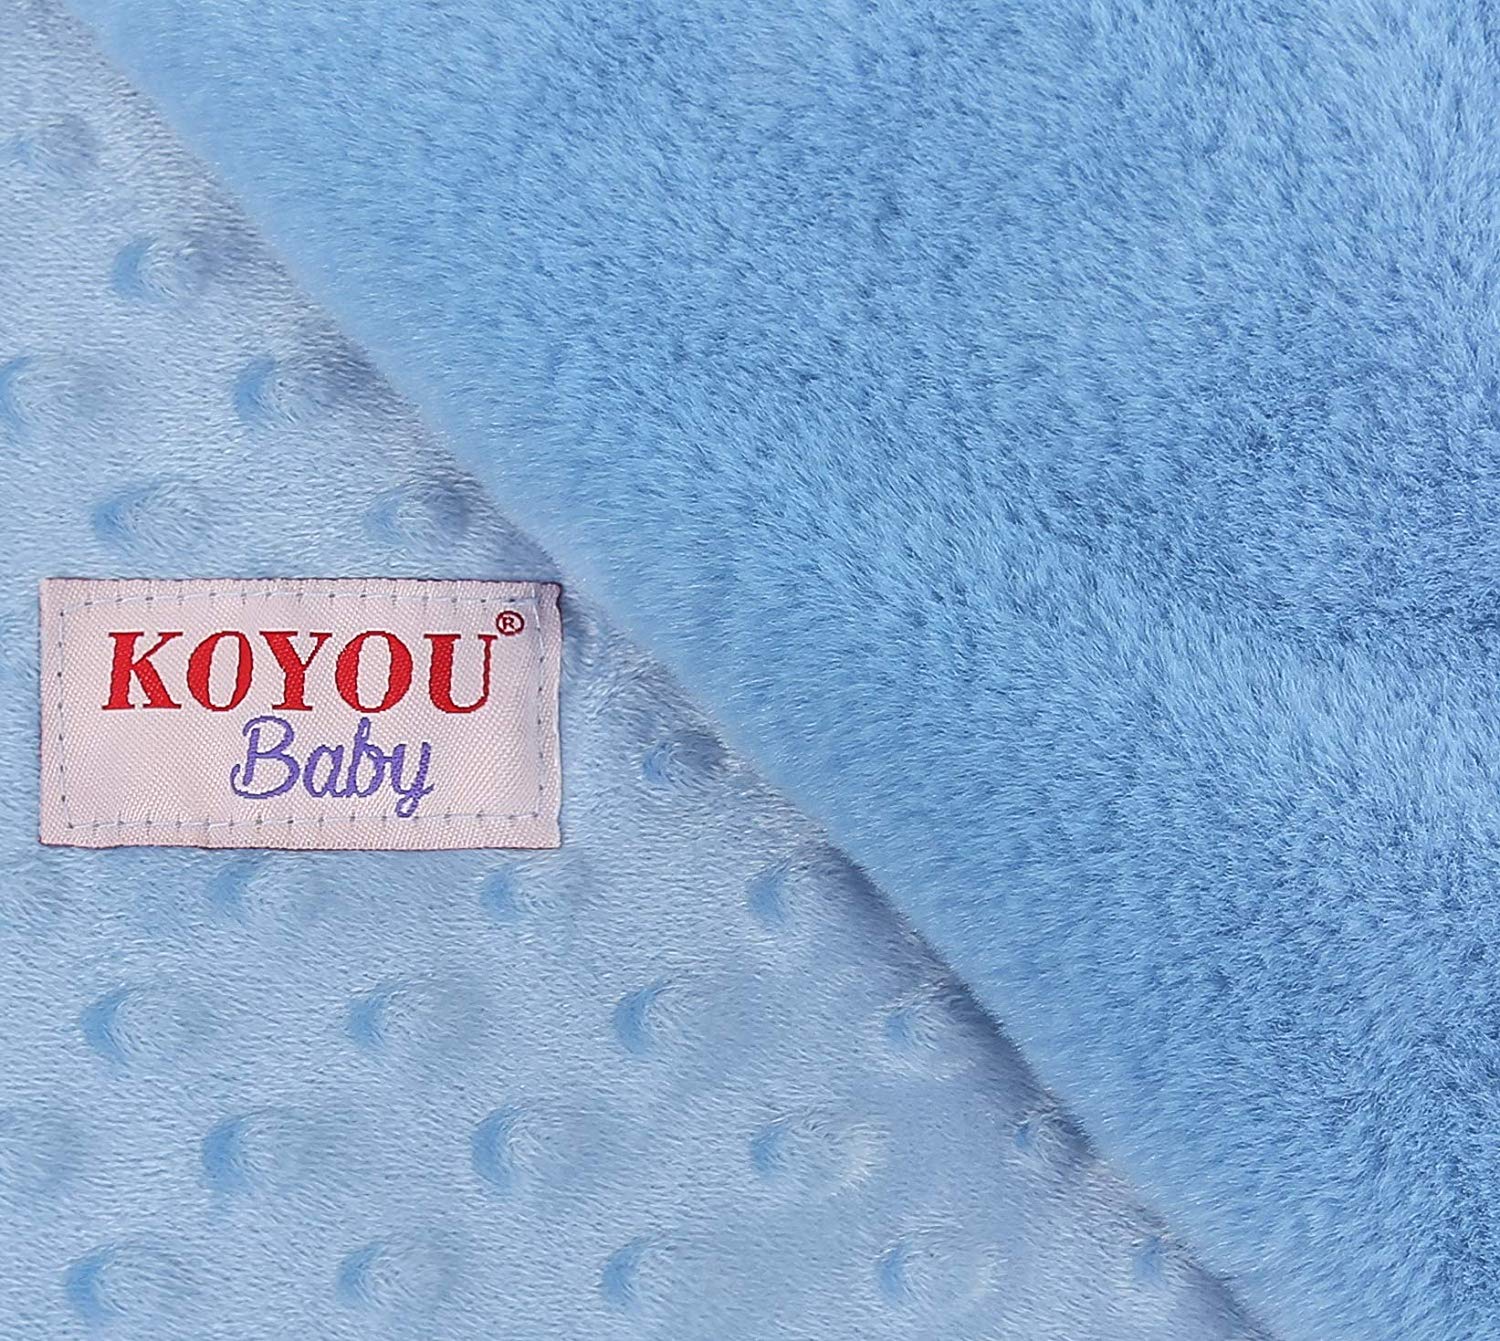 KOYOU BABY - Soft Plush Mink Baby Blanket with Dotted Backing and Silky Trim (30 X 35) - image 2 of 3